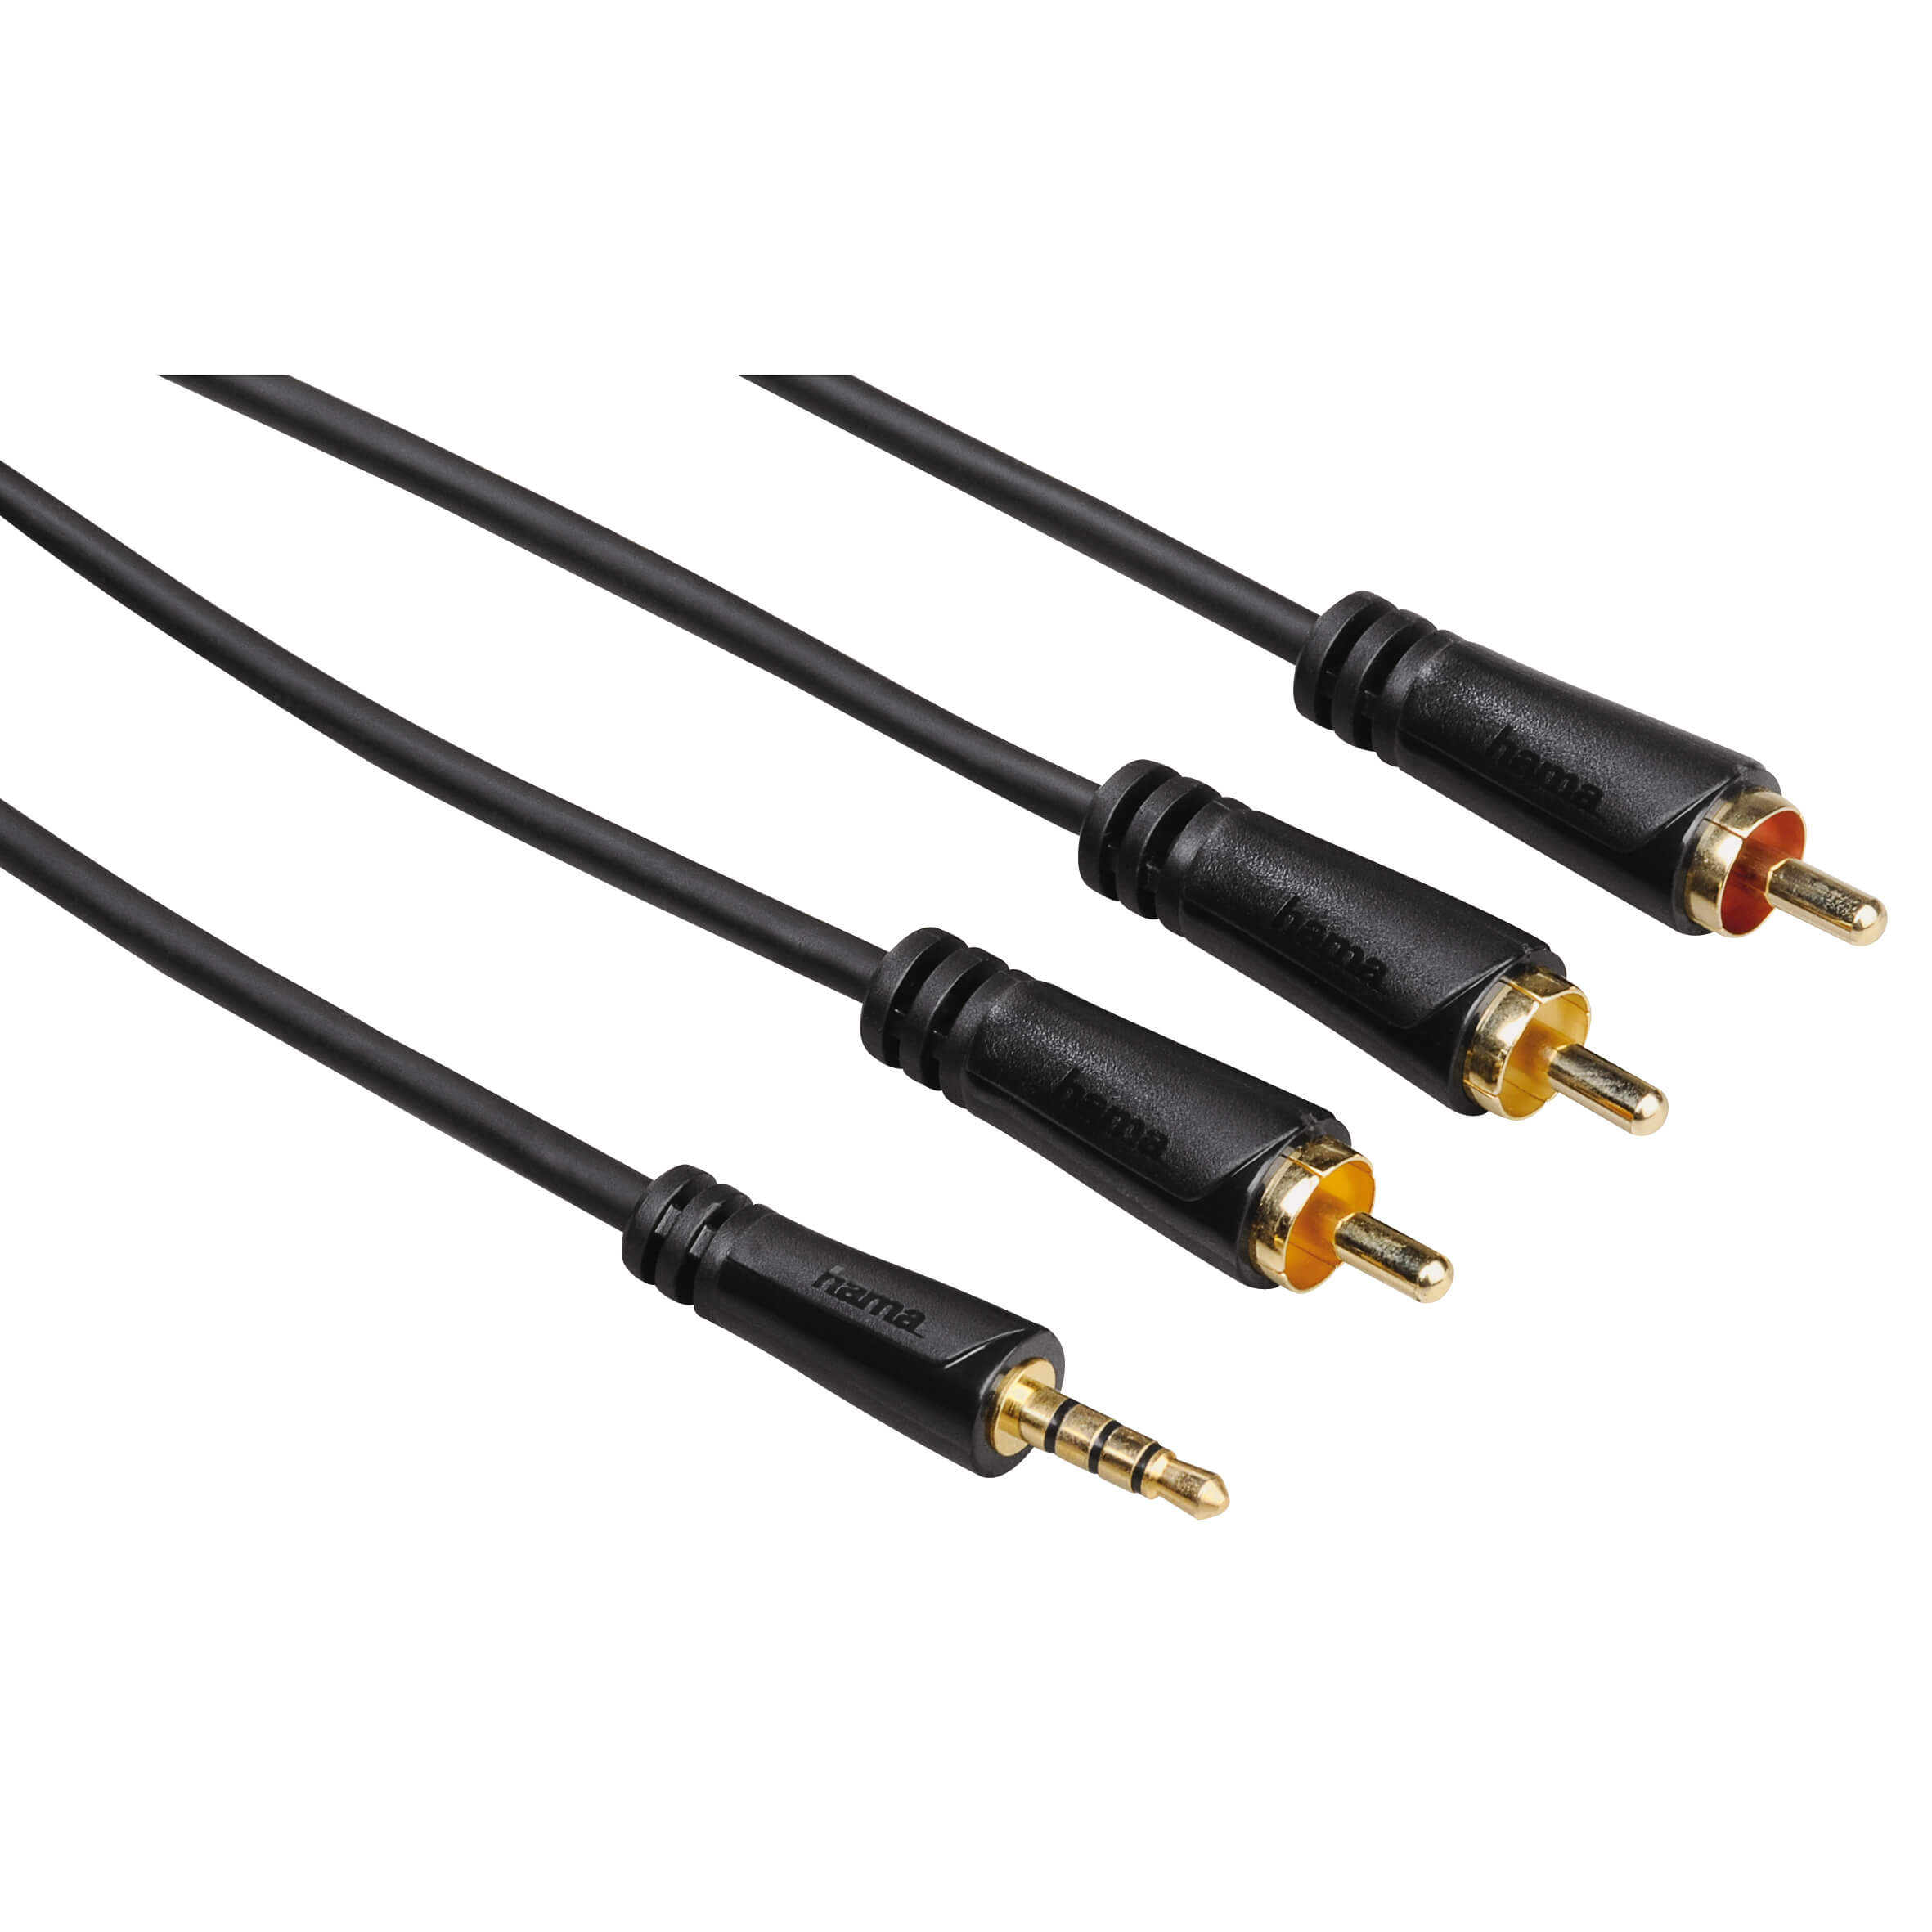 Connecting Cable, 3.5 mm 4-pi n jack plug - 3 RCA plugs, 3.0